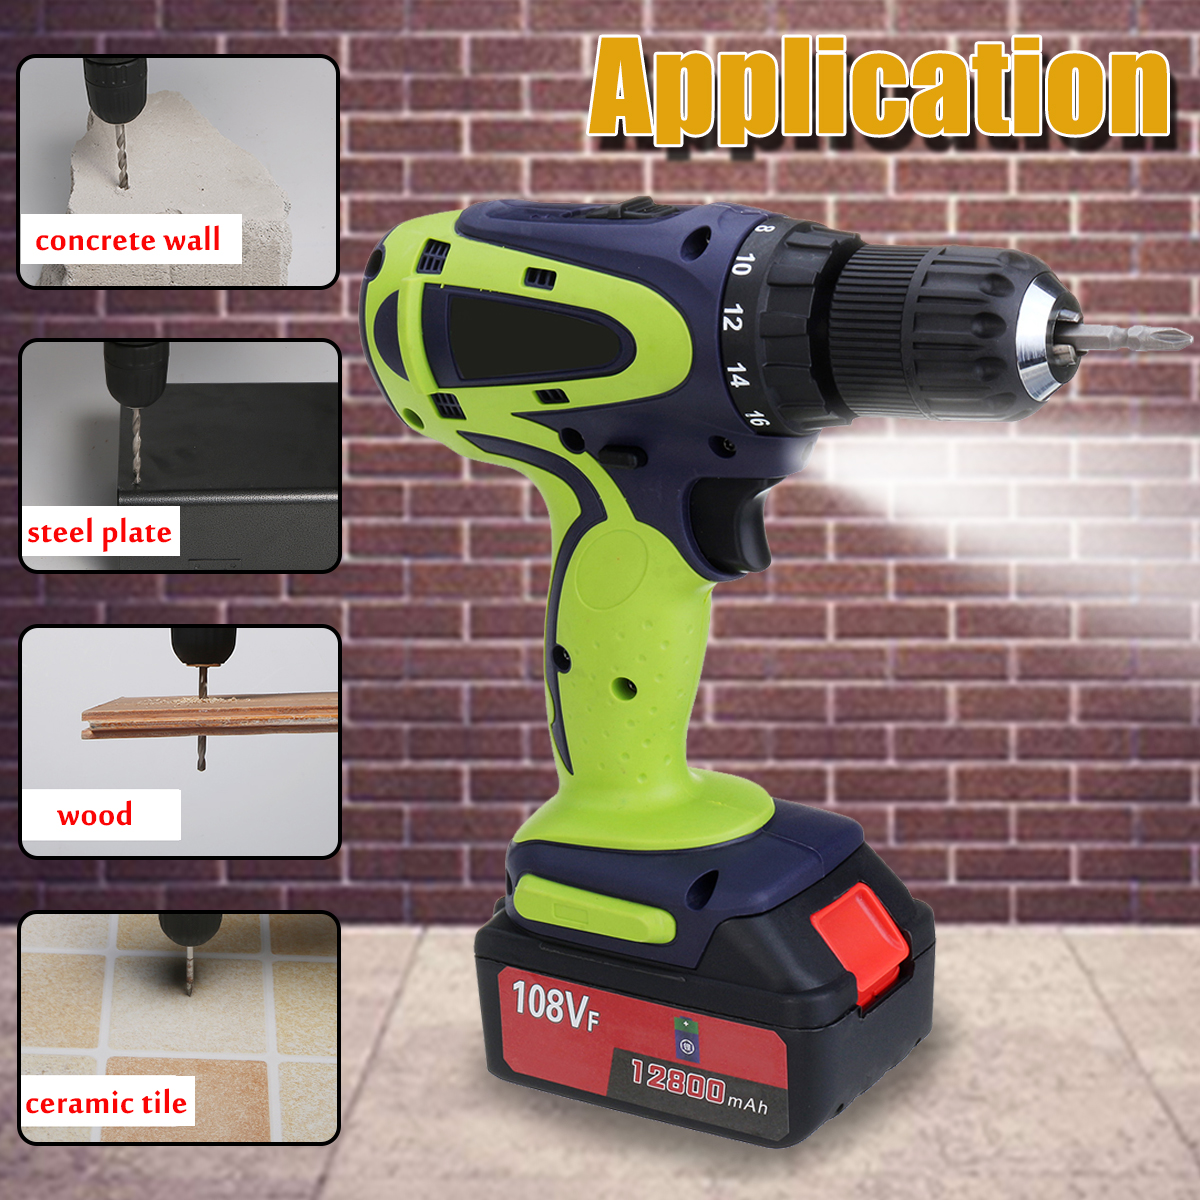 108VF-12800mAh-Dual-Speed-Cordless-Drill-Multifunctional-High-Power-Household-Electric-Drills-W-Acce-1457224-5